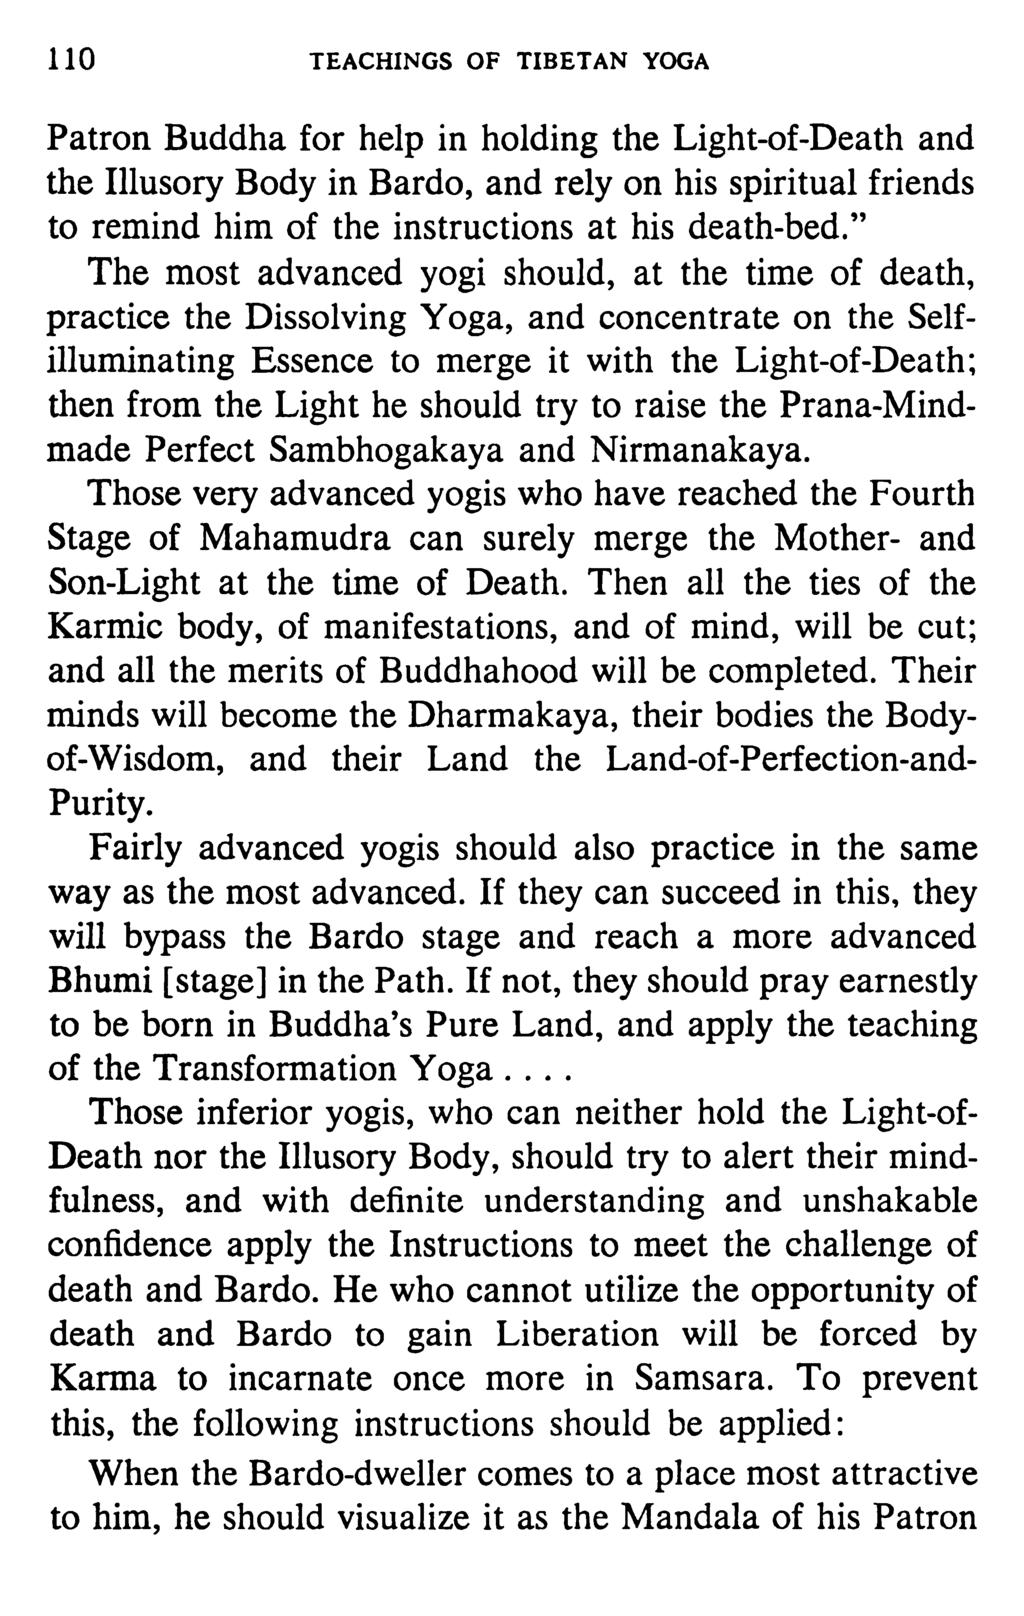 110 TEACHINGS OF TIBETAN YOGA Patron Buddha for help in holding the Light-of-Death and the Illusory Body in Bardo, and rely on his spiritual friends to remind him of the instructions at his death-bed.